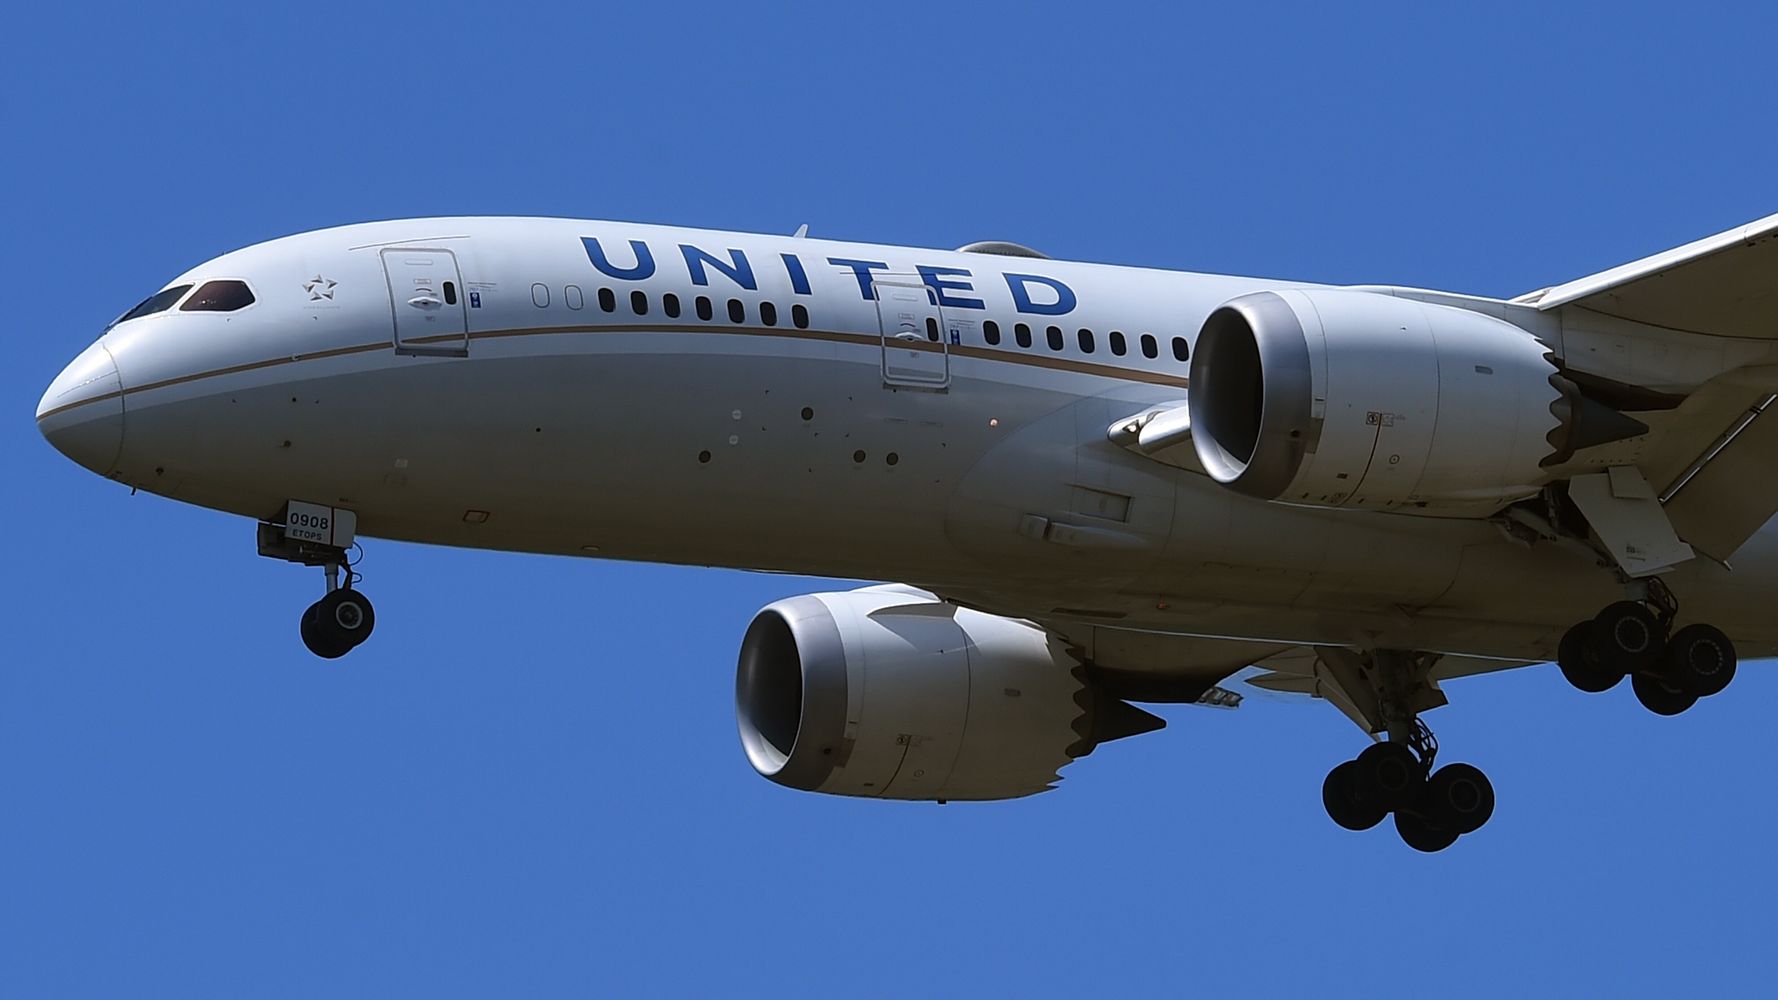 United Airlines Employees With COVID-19 Vaccine Exemptions To Be Placed On Leave